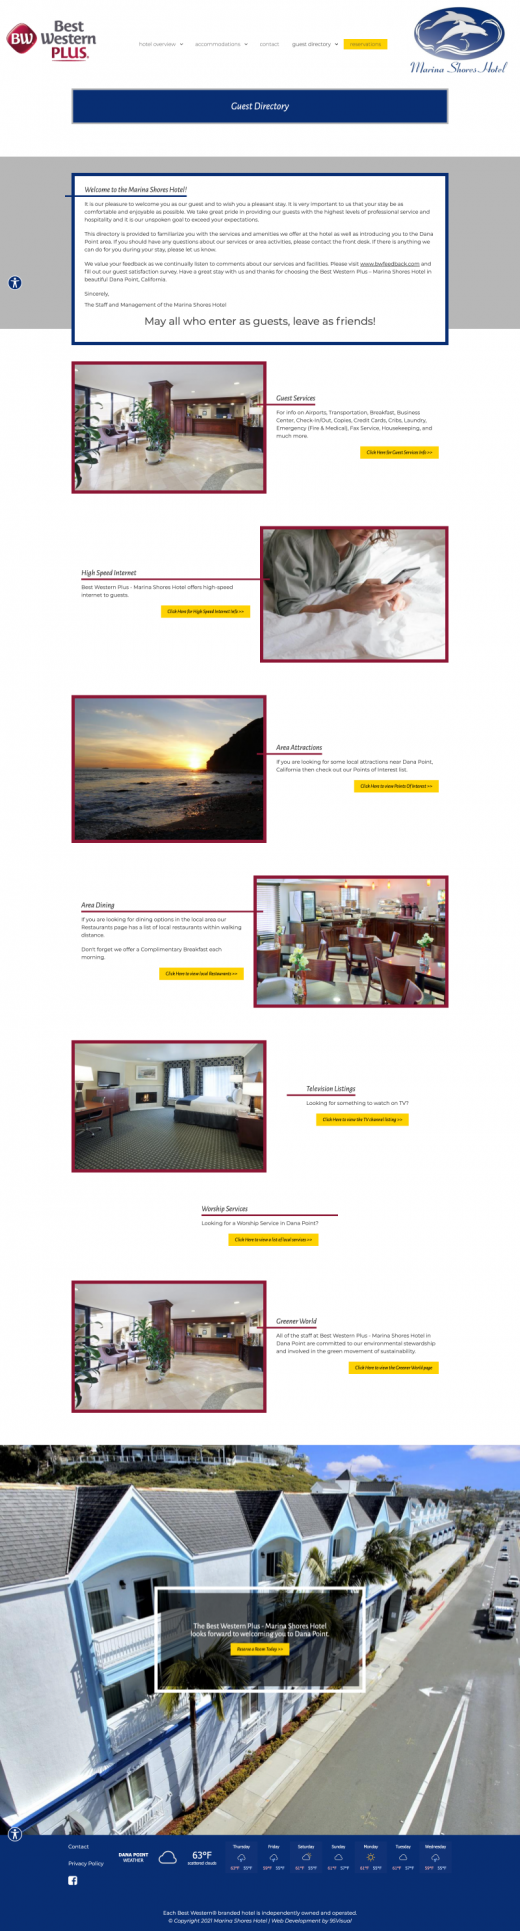 Guest Directory page of Best Western Plus - Marina Shores Hotel's website.